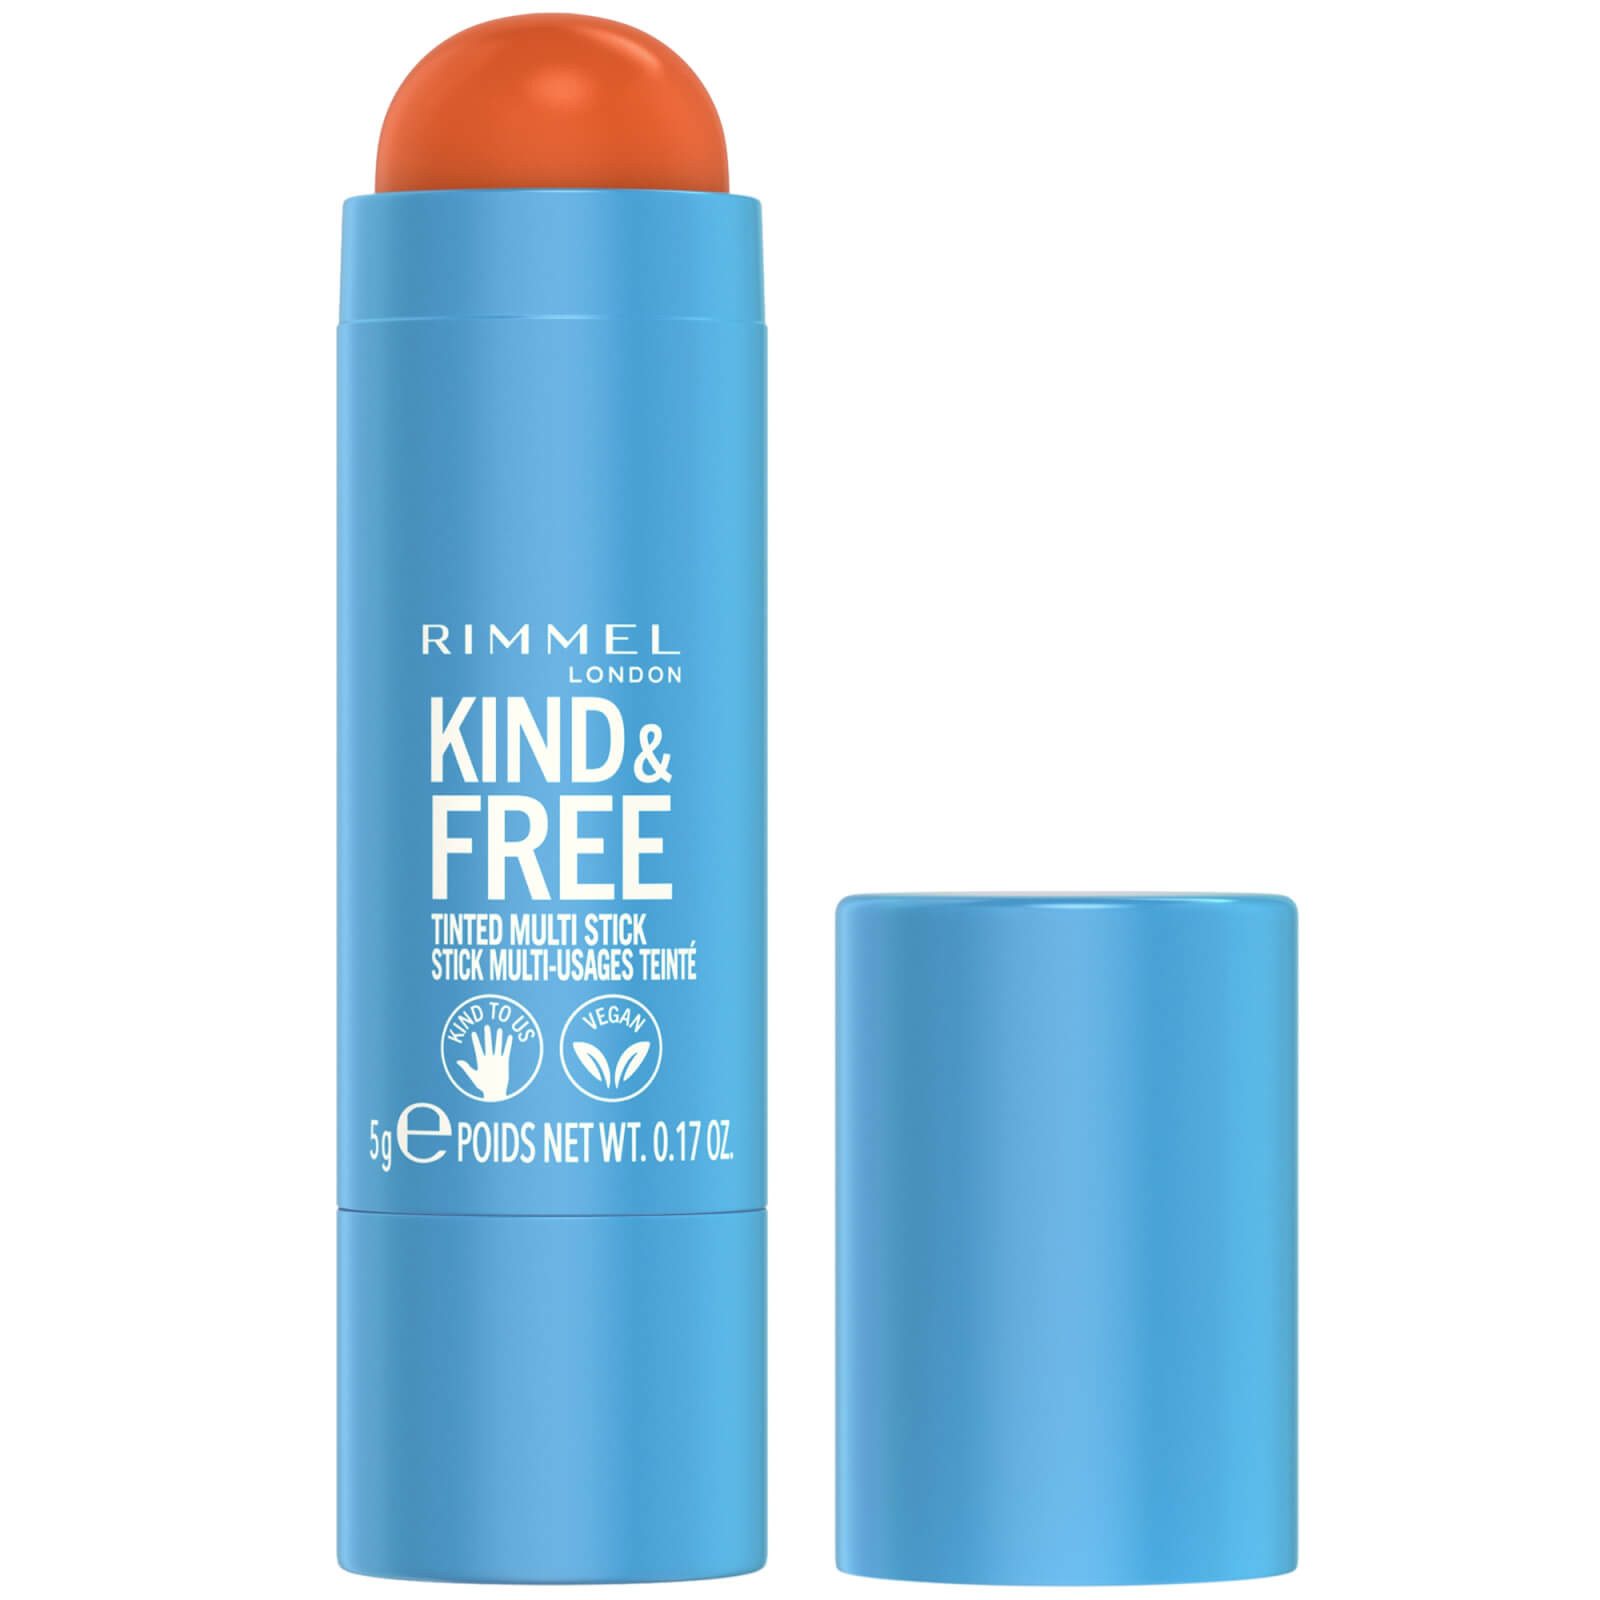 Image of Rimmel Kind and Free Multi-Stick 5ml (Various Shades) - 004 Tangerine Dream